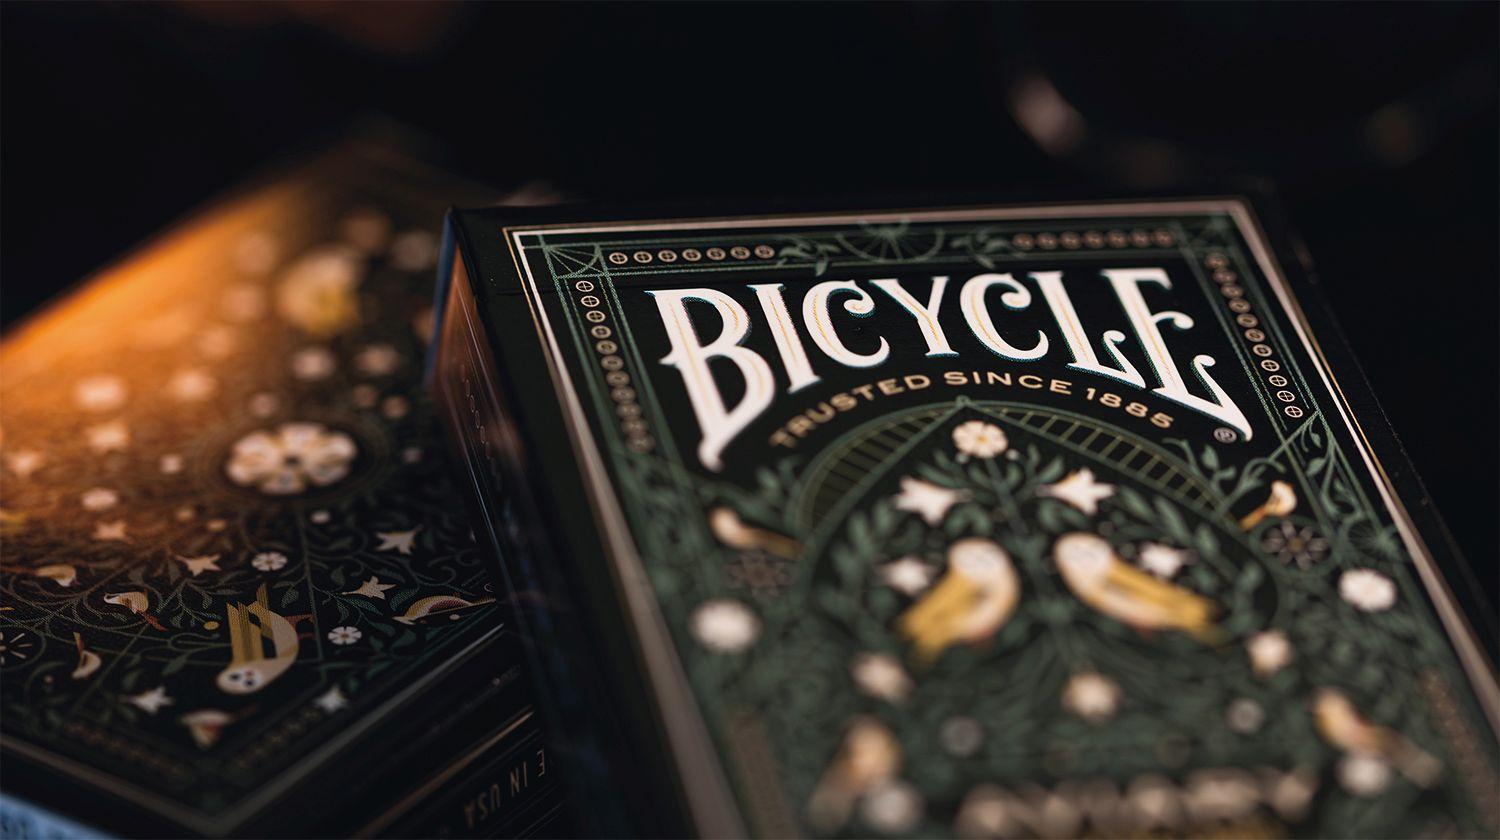 Bild: 73854093634 | Bicycle Aviary | United States Playing Card Company | Spiel | Englisch